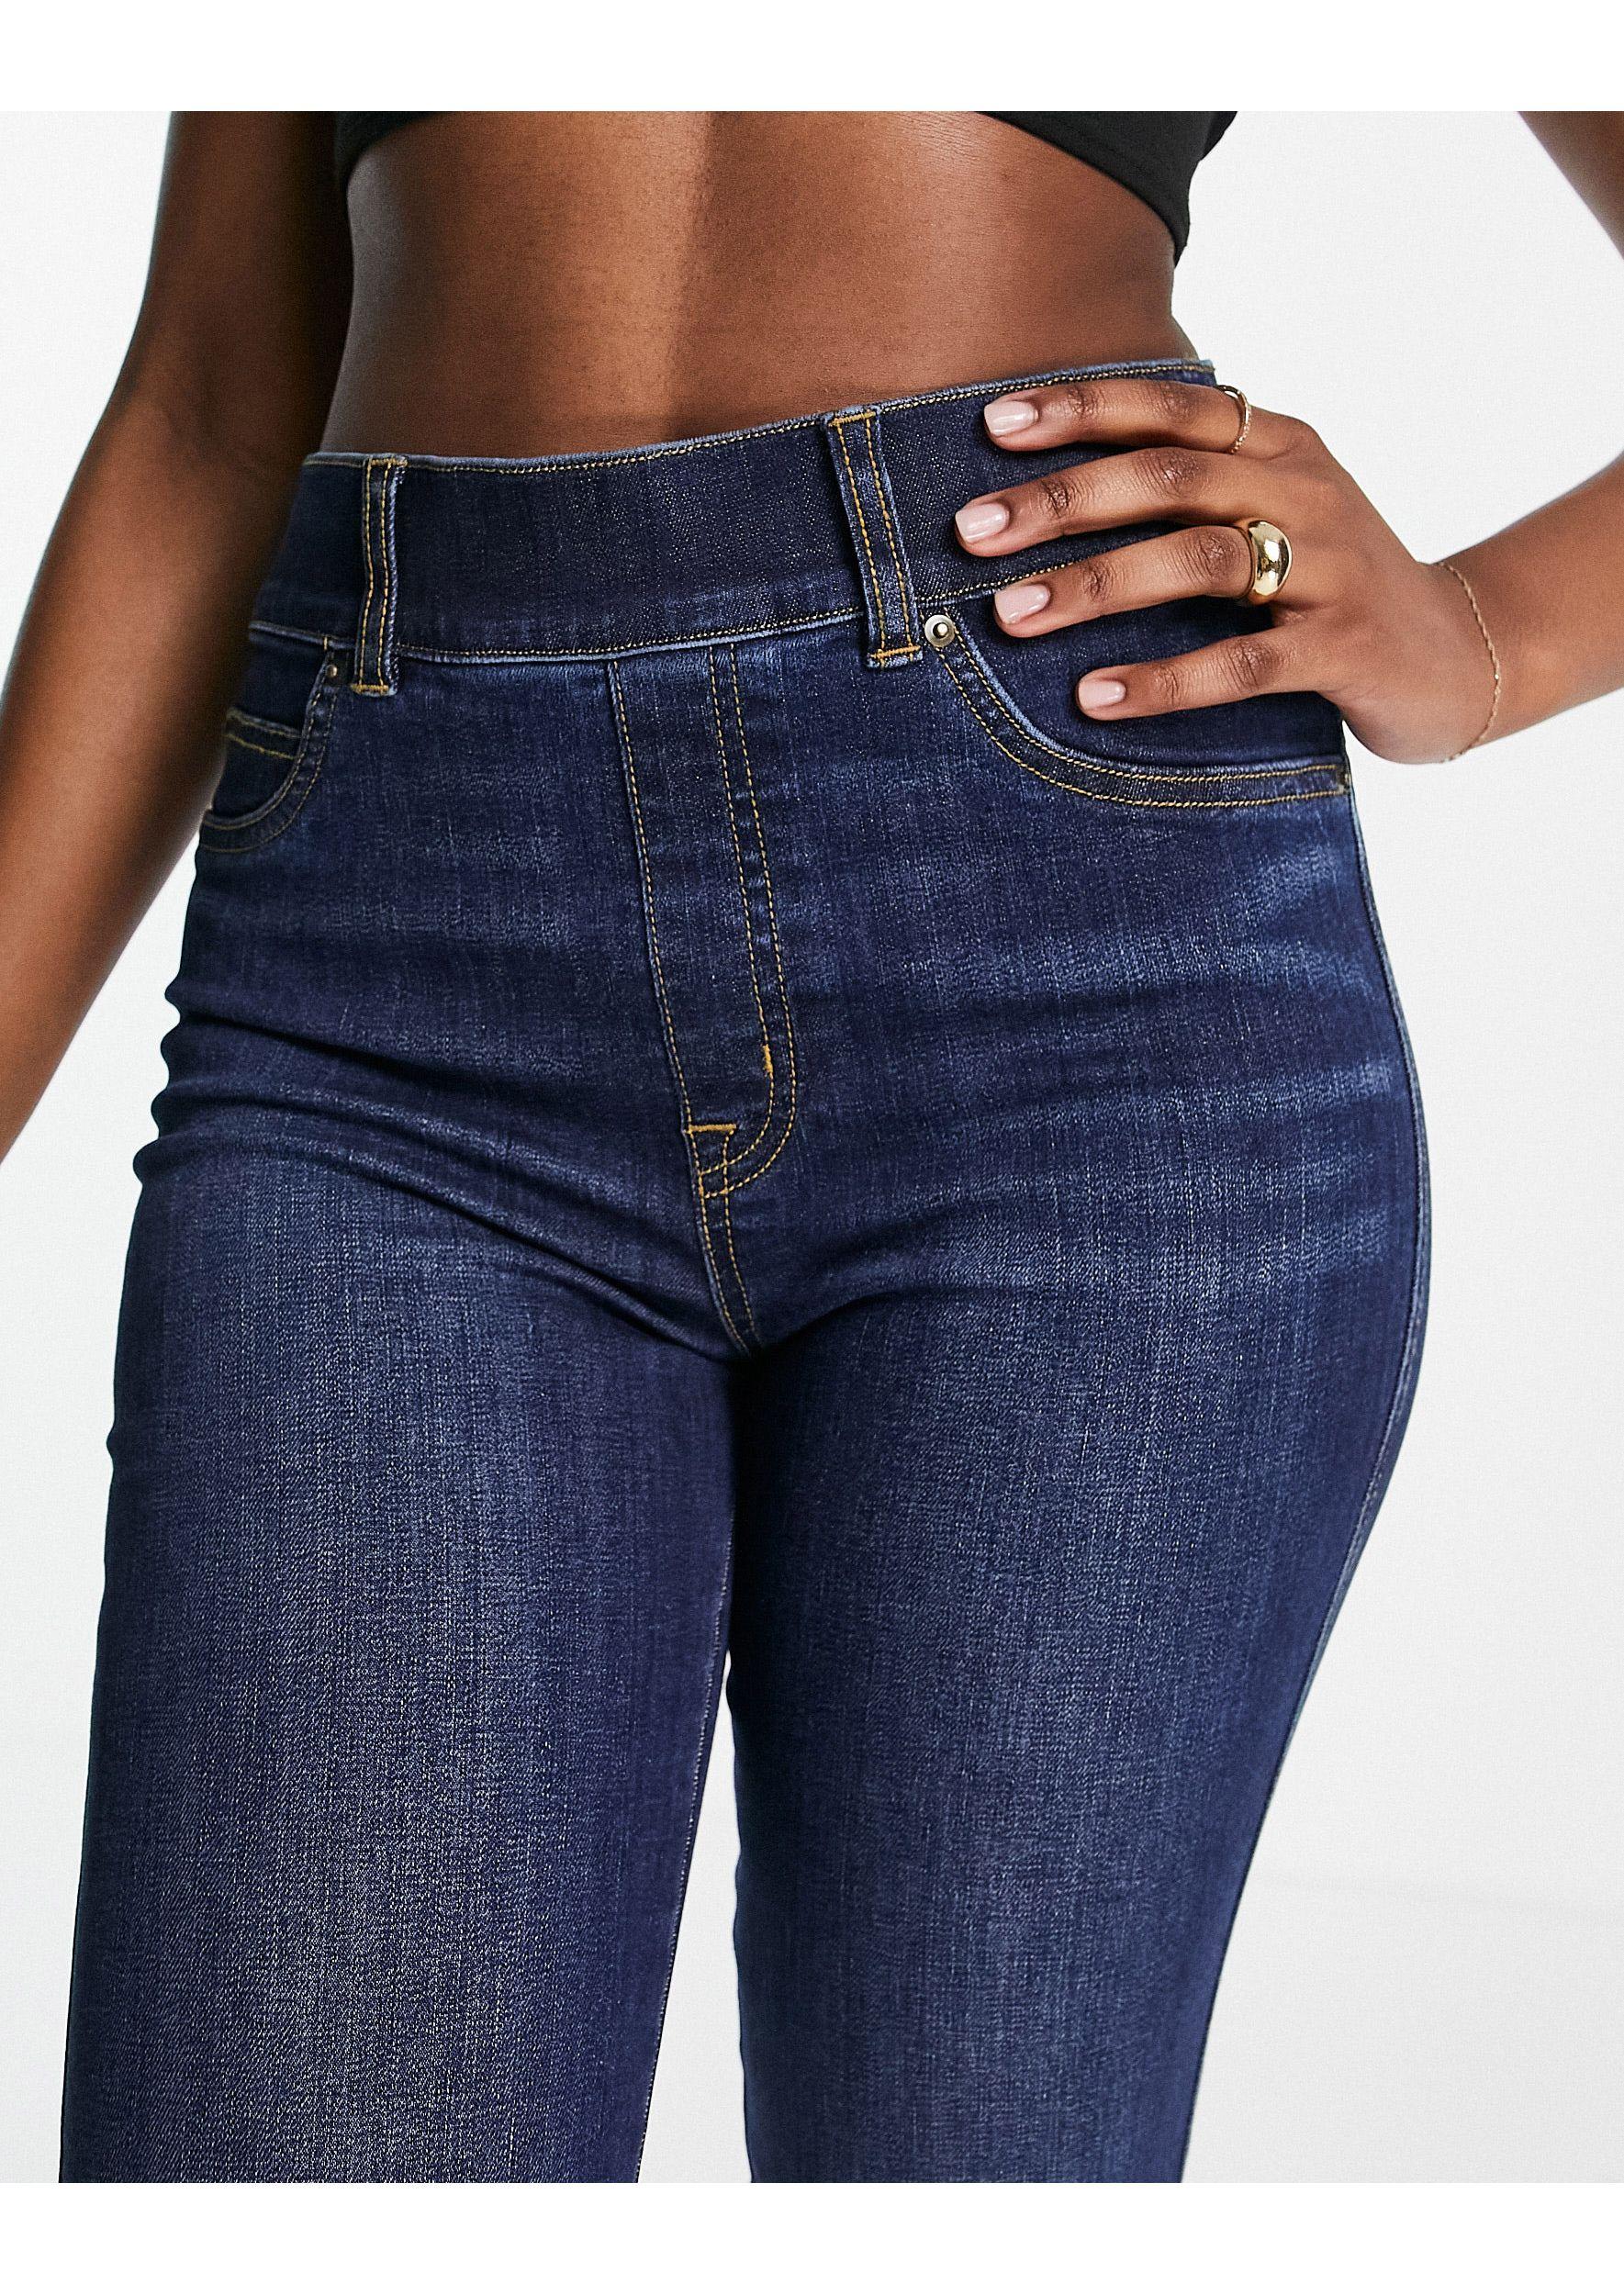 Spanx high rise flare jeans in dark wash